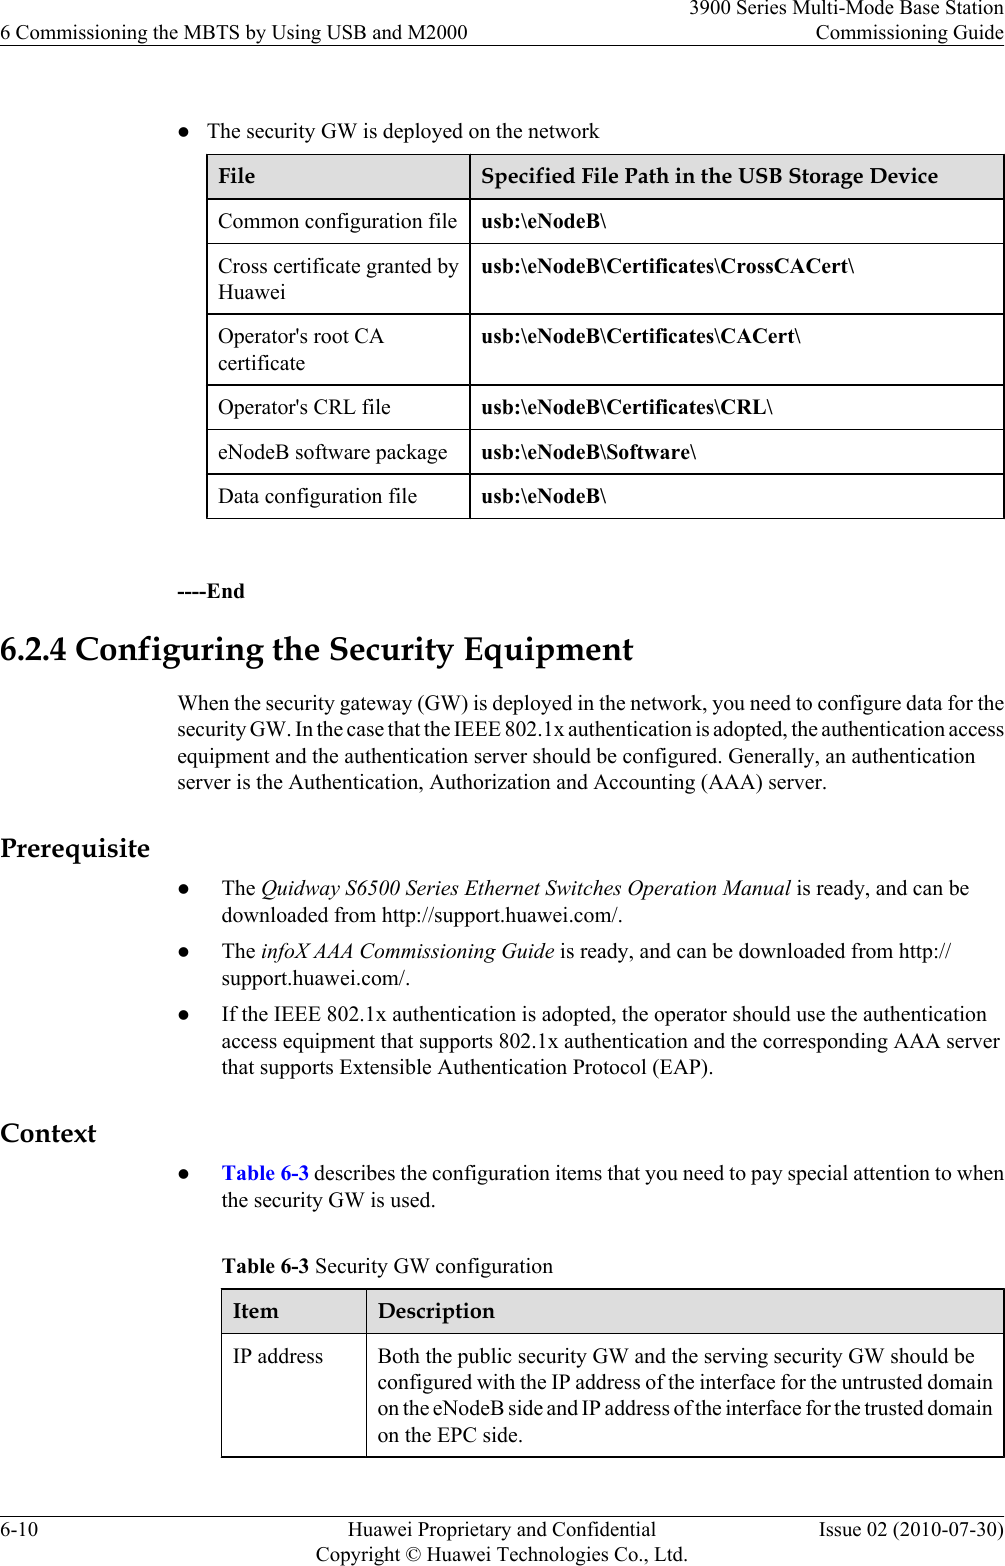  lThe security GW is deployed on the networkFile Specified File Path in the USB Storage DeviceCommon configuration file usb:\eNodeB\Cross certificate granted byHuaweiusb:\eNodeB\Certificates\CrossCACert\Operator&apos;s root CAcertificateusb:\eNodeB\Certificates\CACert\Operator&apos;s CRL file usb:\eNodeB\Certificates\CRL\eNodeB software package usb:\eNodeB\Software\Data configuration file usb:\eNodeB\ ----End6.2.4 Configuring the Security EquipmentWhen the security gateway (GW) is deployed in the network, you need to configure data for thesecurity GW. In the case that the IEEE 802.1x authentication is adopted, the authentication accessequipment and the authentication server should be configured. Generally, an authenticationserver is the Authentication, Authorization and Accounting (AAA) server.PrerequisitelThe Quidway S6500 Series Ethernet Switches Operation Manual is ready, and can bedownloaded from http://support.huawei.com/.lThe infoX AAA Commissioning Guide is ready, and can be downloaded from http://support.huawei.com/.lIf the IEEE 802.1x authentication is adopted, the operator should use the authenticationaccess equipment that supports 802.1x authentication and the corresponding AAA serverthat supports Extensible Authentication Protocol (EAP).ContextlTable 6-3 describes the configuration items that you need to pay special attention to whenthe security GW is used.Table 6-3 Security GW configurationItem DescriptionIP address Both the public security GW and the serving security GW should beconfigured with the IP address of the interface for the untrusted domainon the eNodeB side and IP address of the interface for the trusted domainon the EPC side.6 Commissioning the MBTS by Using USB and M20003900 Series Multi-Mode Base StationCommissioning Guide6-10 Huawei Proprietary and ConfidentialCopyright © Huawei Technologies Co., Ltd.Issue 02 (2010-07-30)